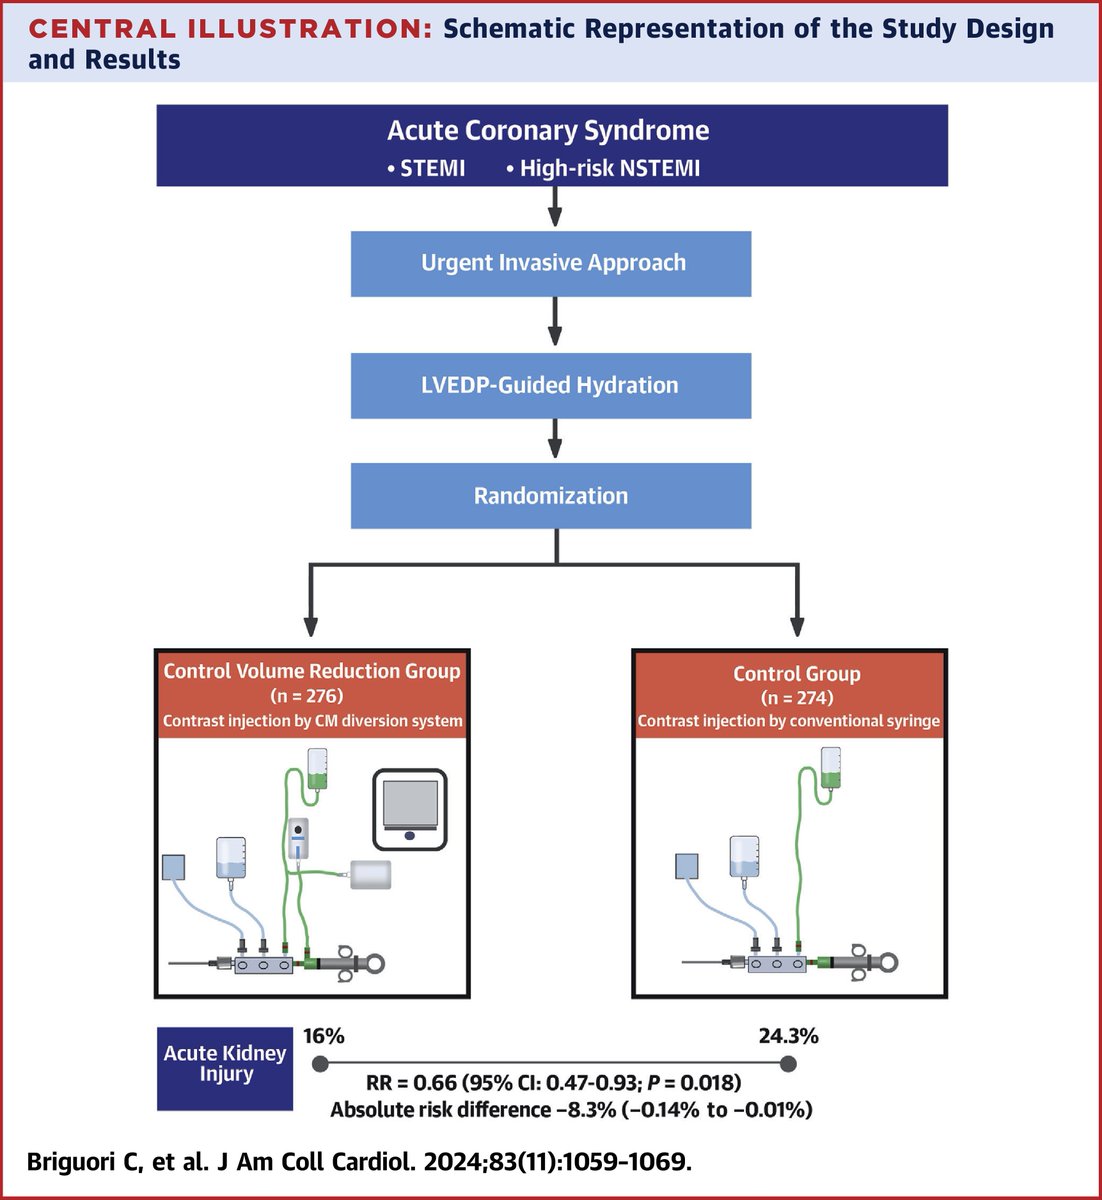 How do contrast media diversion systems impact the incidence of acute kidney injury in pts w/ ACS?

In this randomized clinical trial, authors investigate w/ major possible impacts for #Cardiology providers: bit.ly/3vjZWnl

#JACC #AKI #cvACS #CardioTwitter @gbiondizoccai